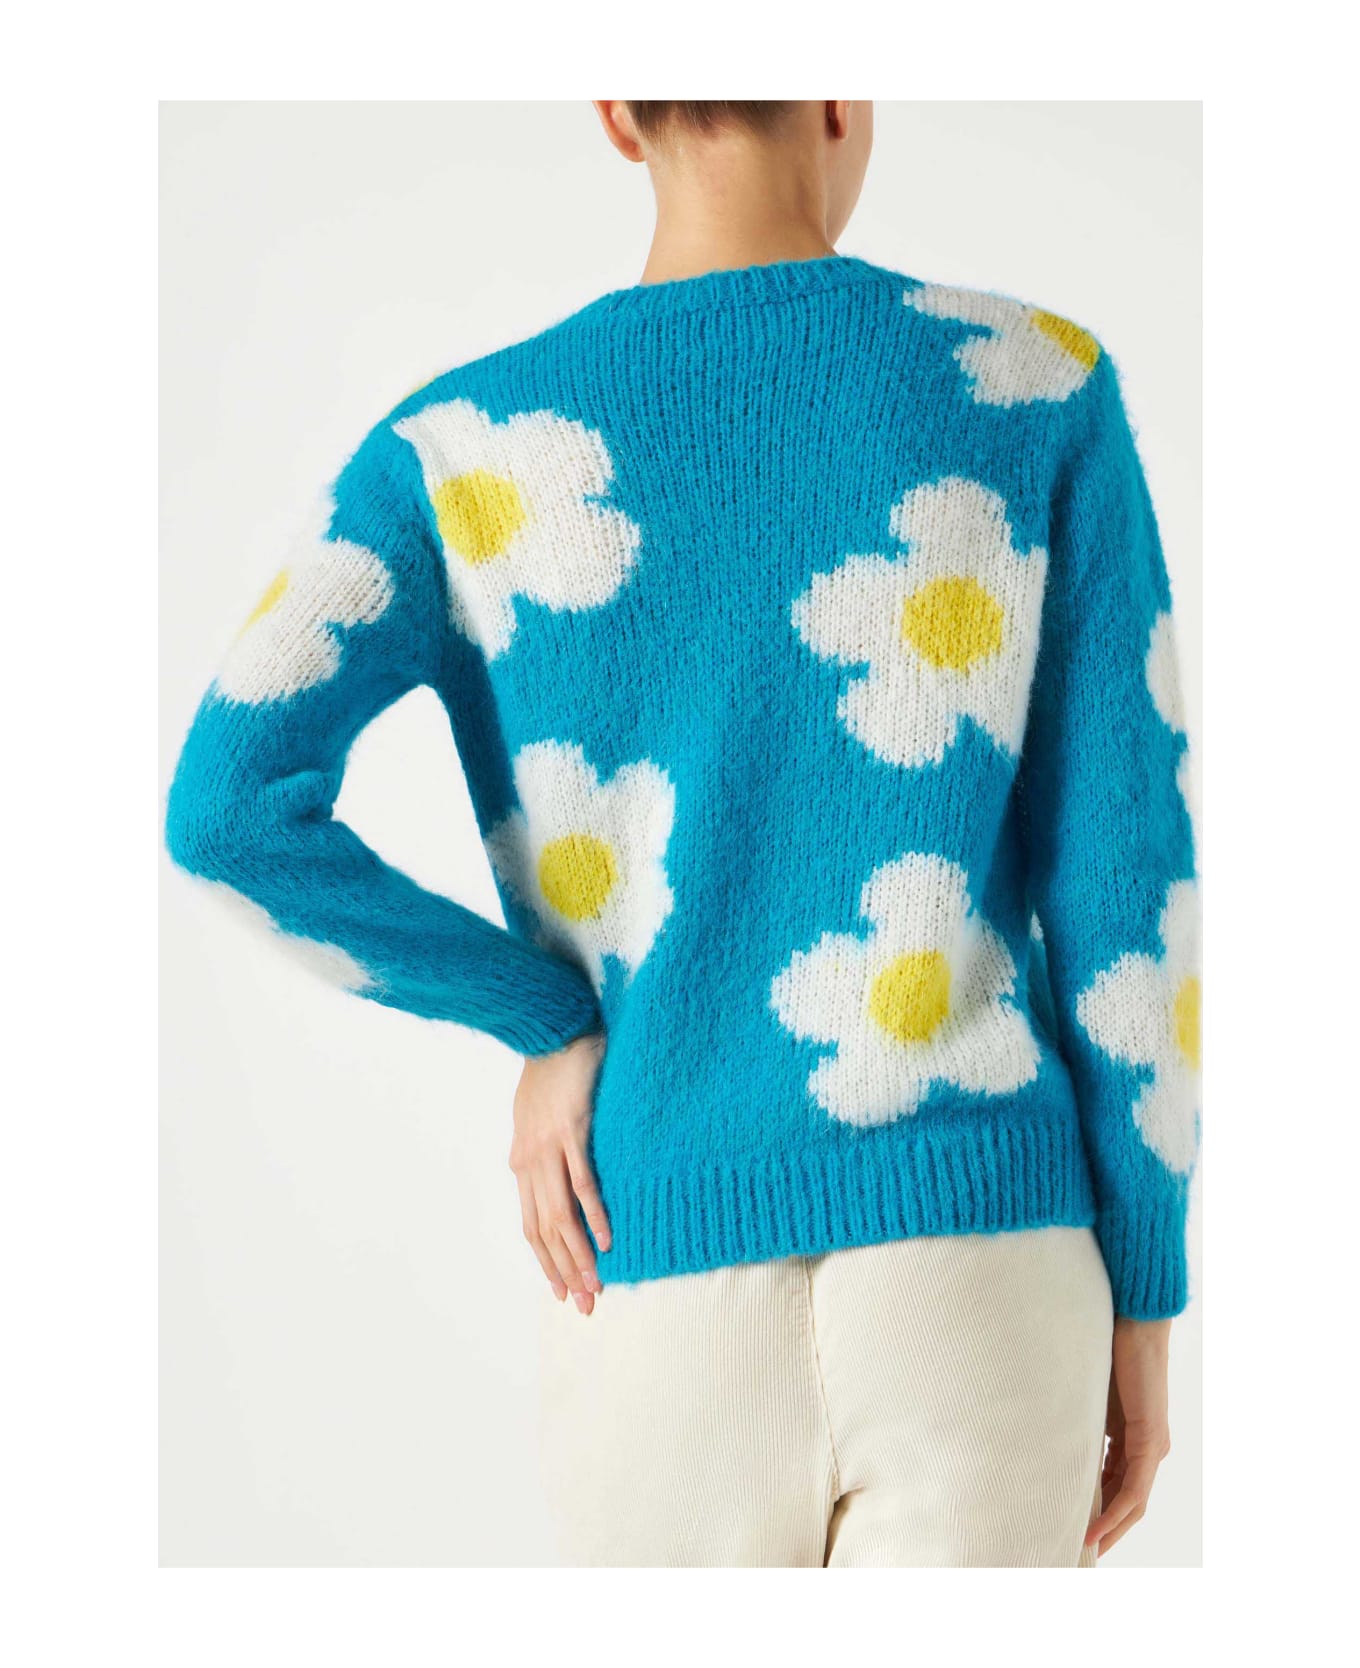 MC2 Saint Barth Woman Brushed Sweater With Daisies And Summer Dreamer Embroidery